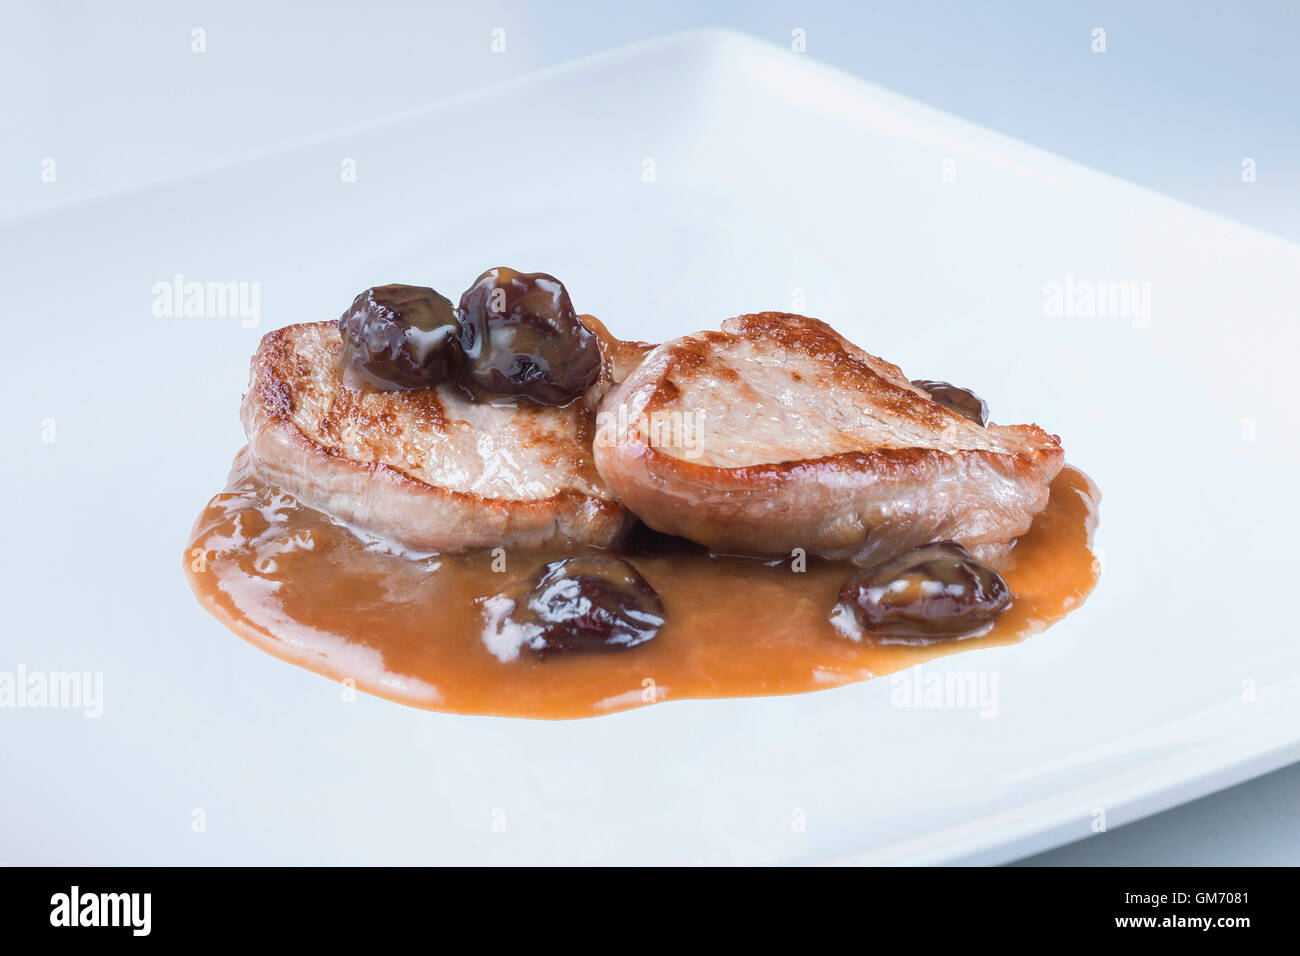 delicious traditional recipe from spain with meat and wine Stock Photo